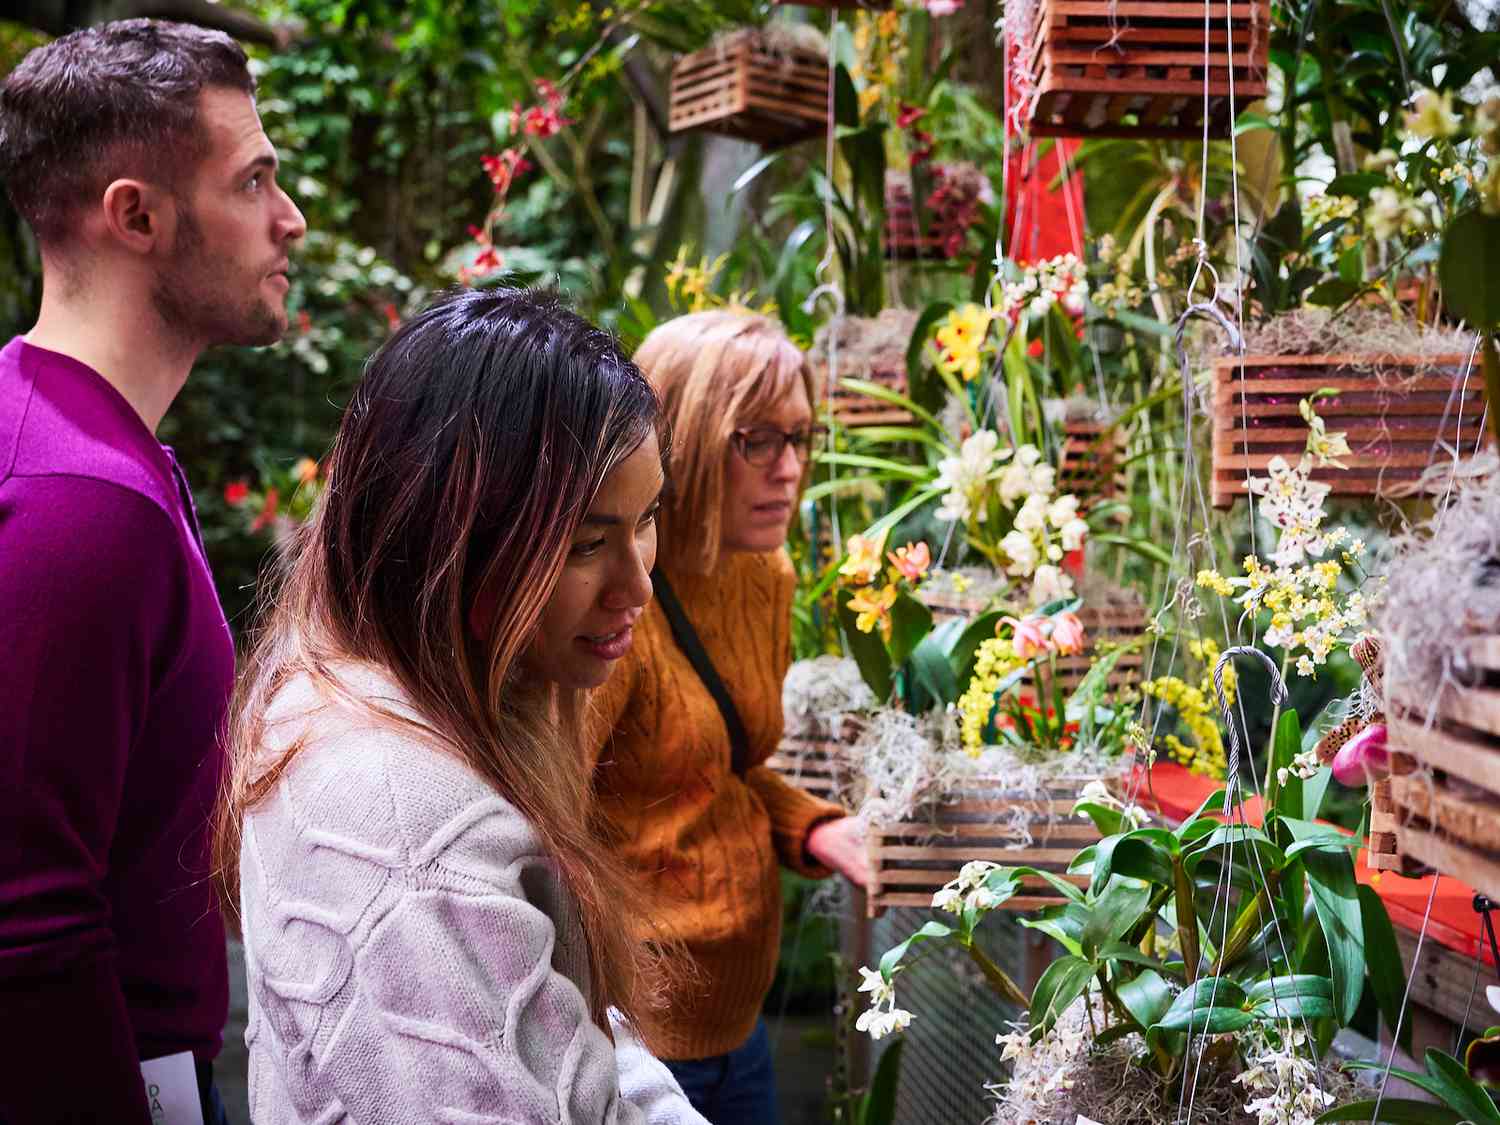 Orchid show at Cleveland Botanic Gardens, Holden Forests & Gardens